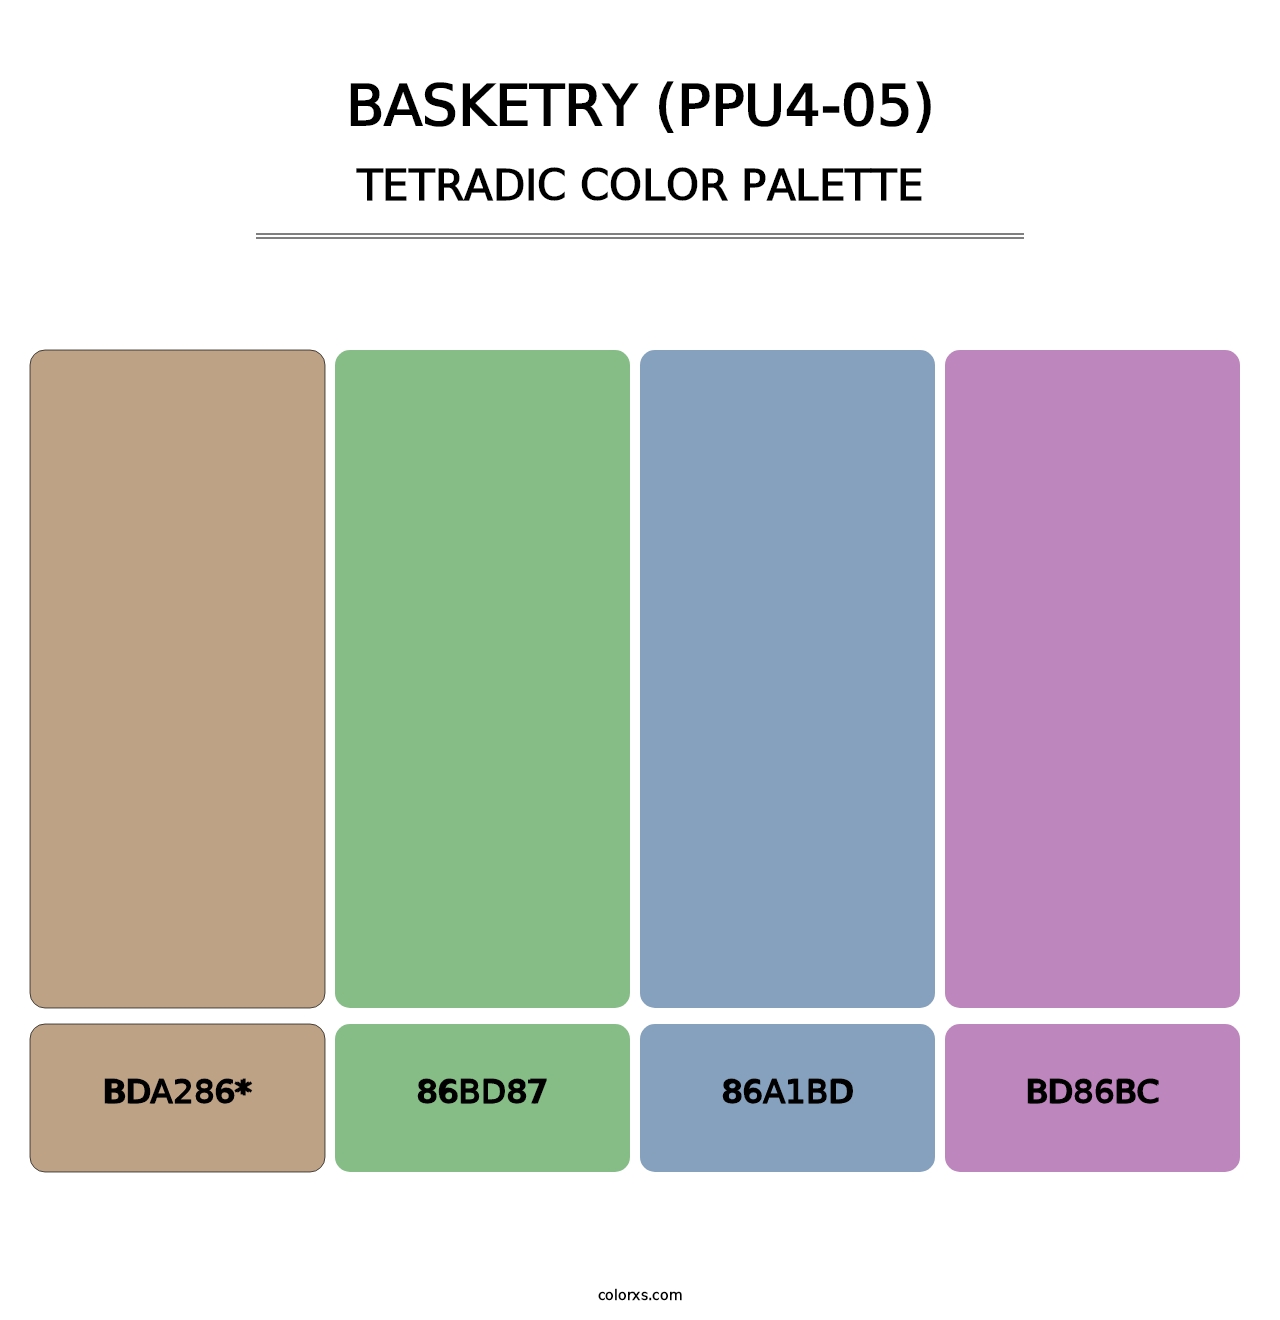 Basketry (PPU4-05) - Tetradic Color Palette